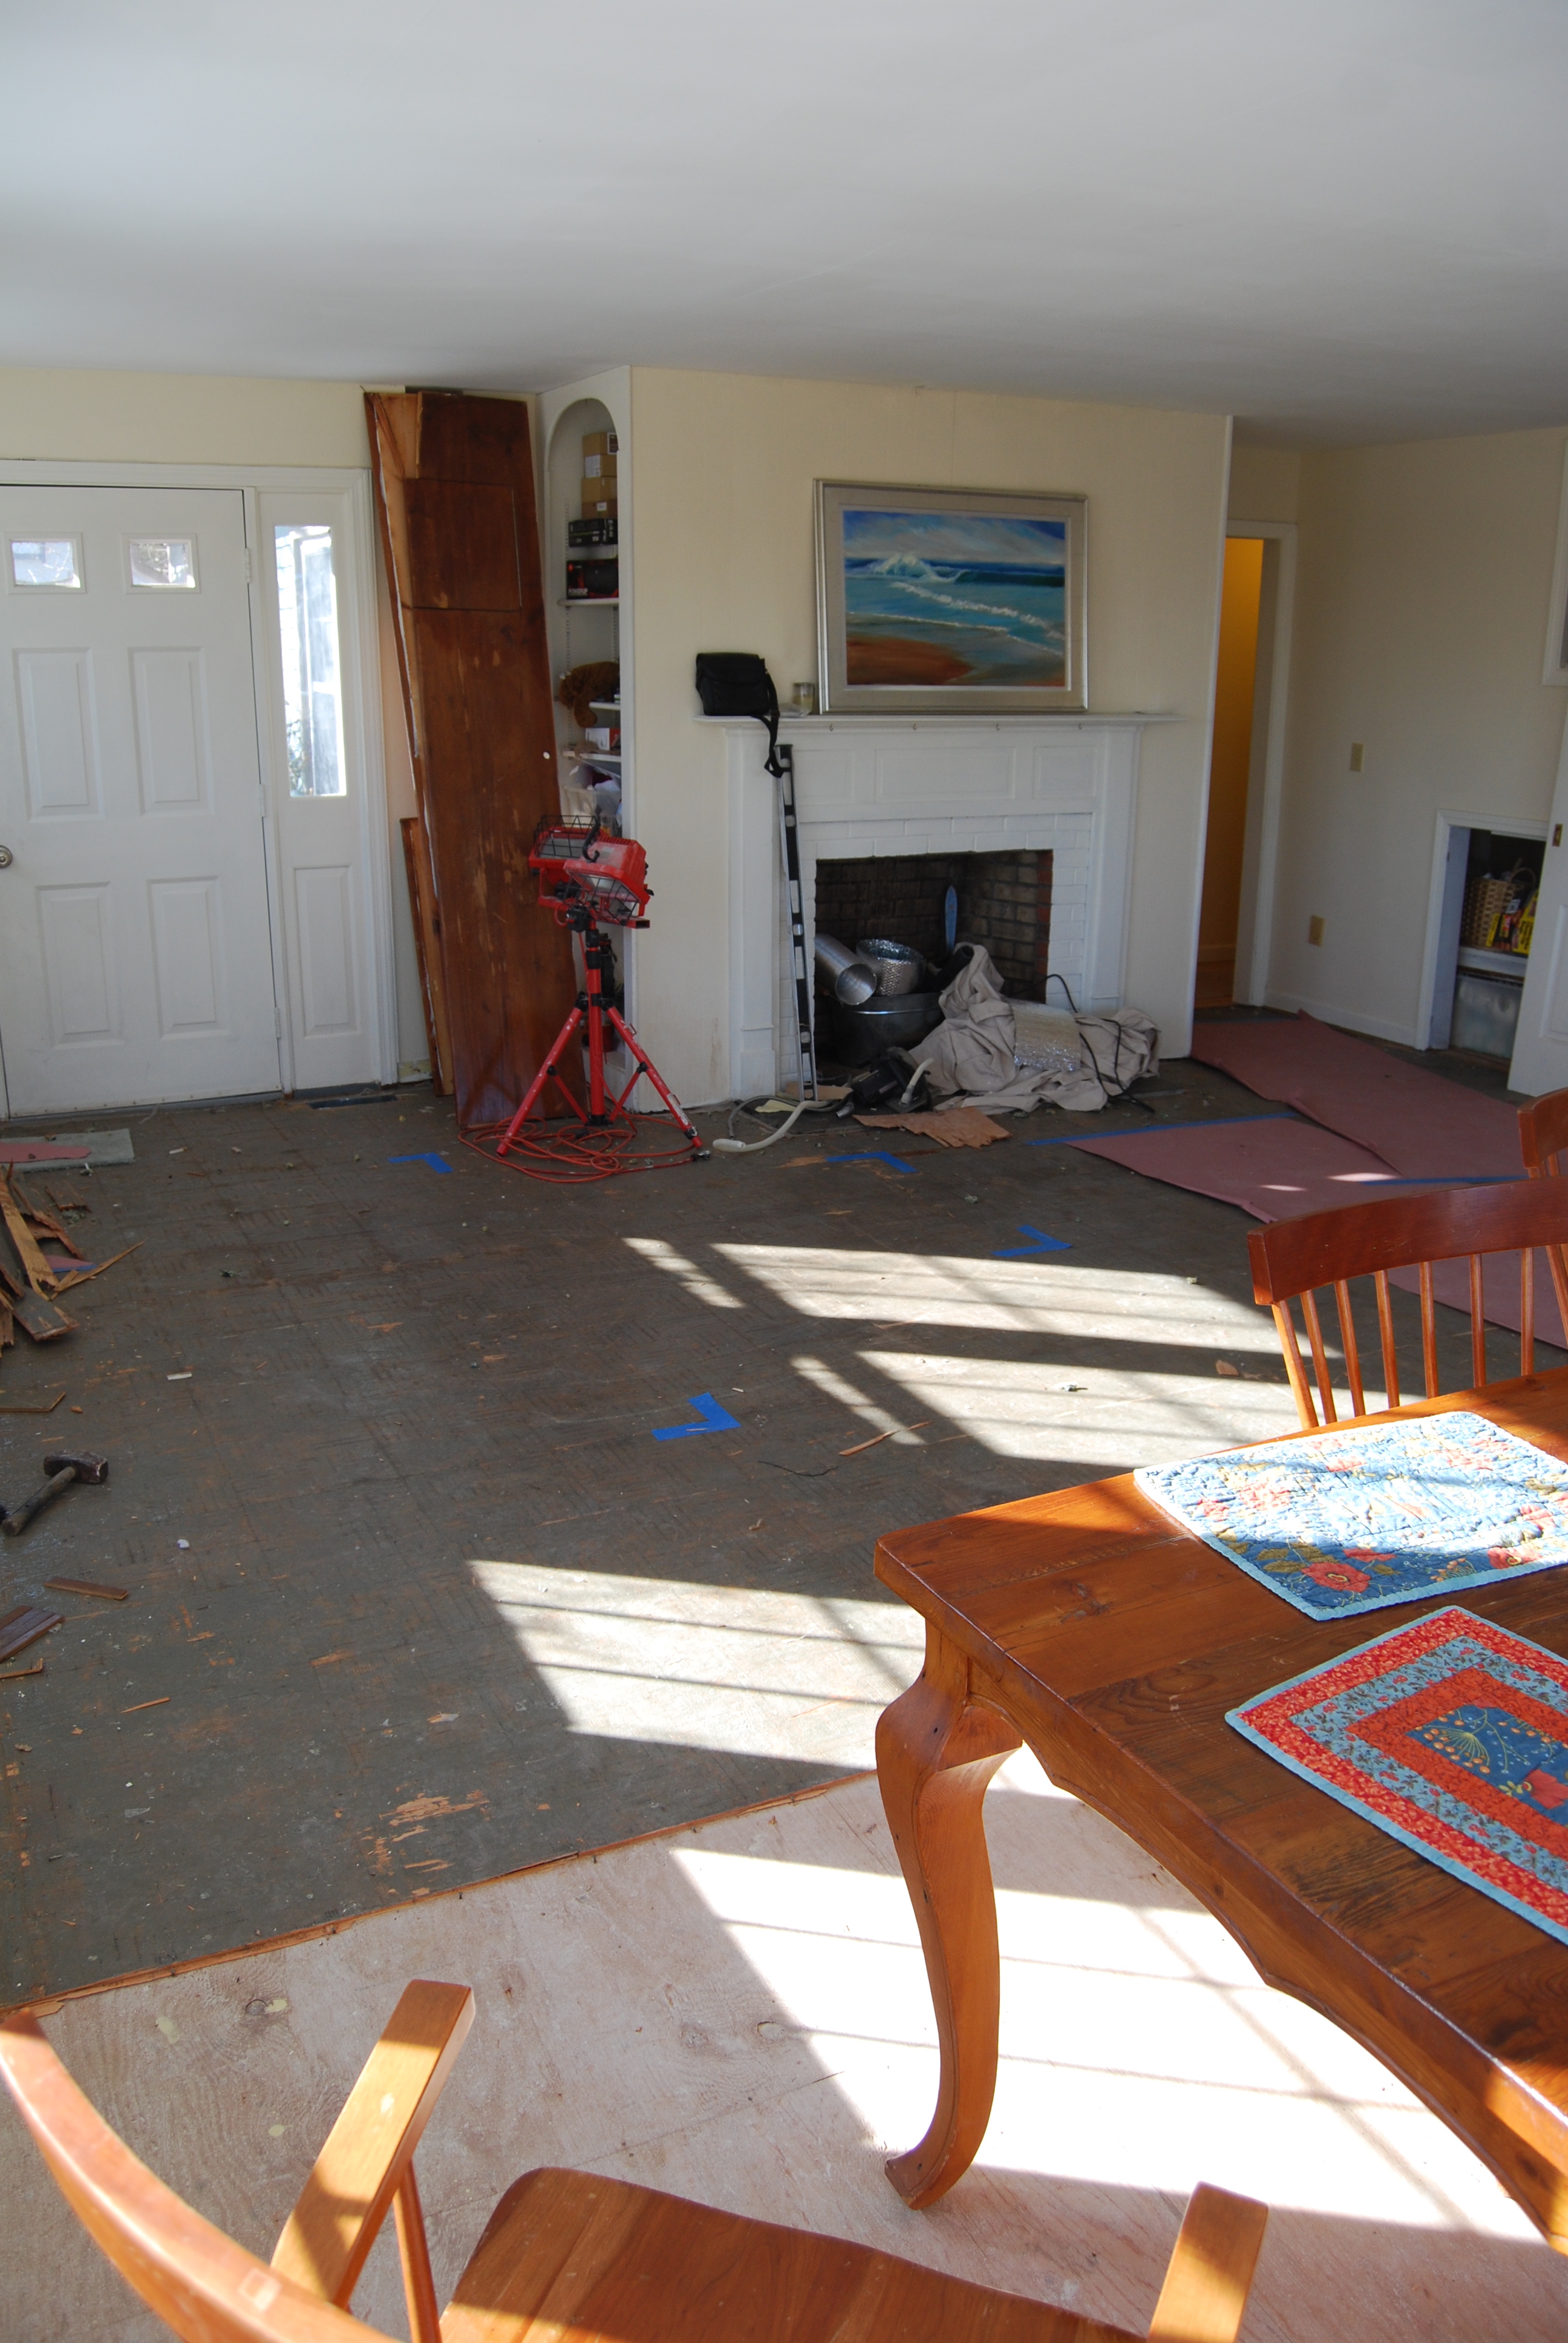 So, we tore it up, tore up the padding, and tore up one layer of subfloor.